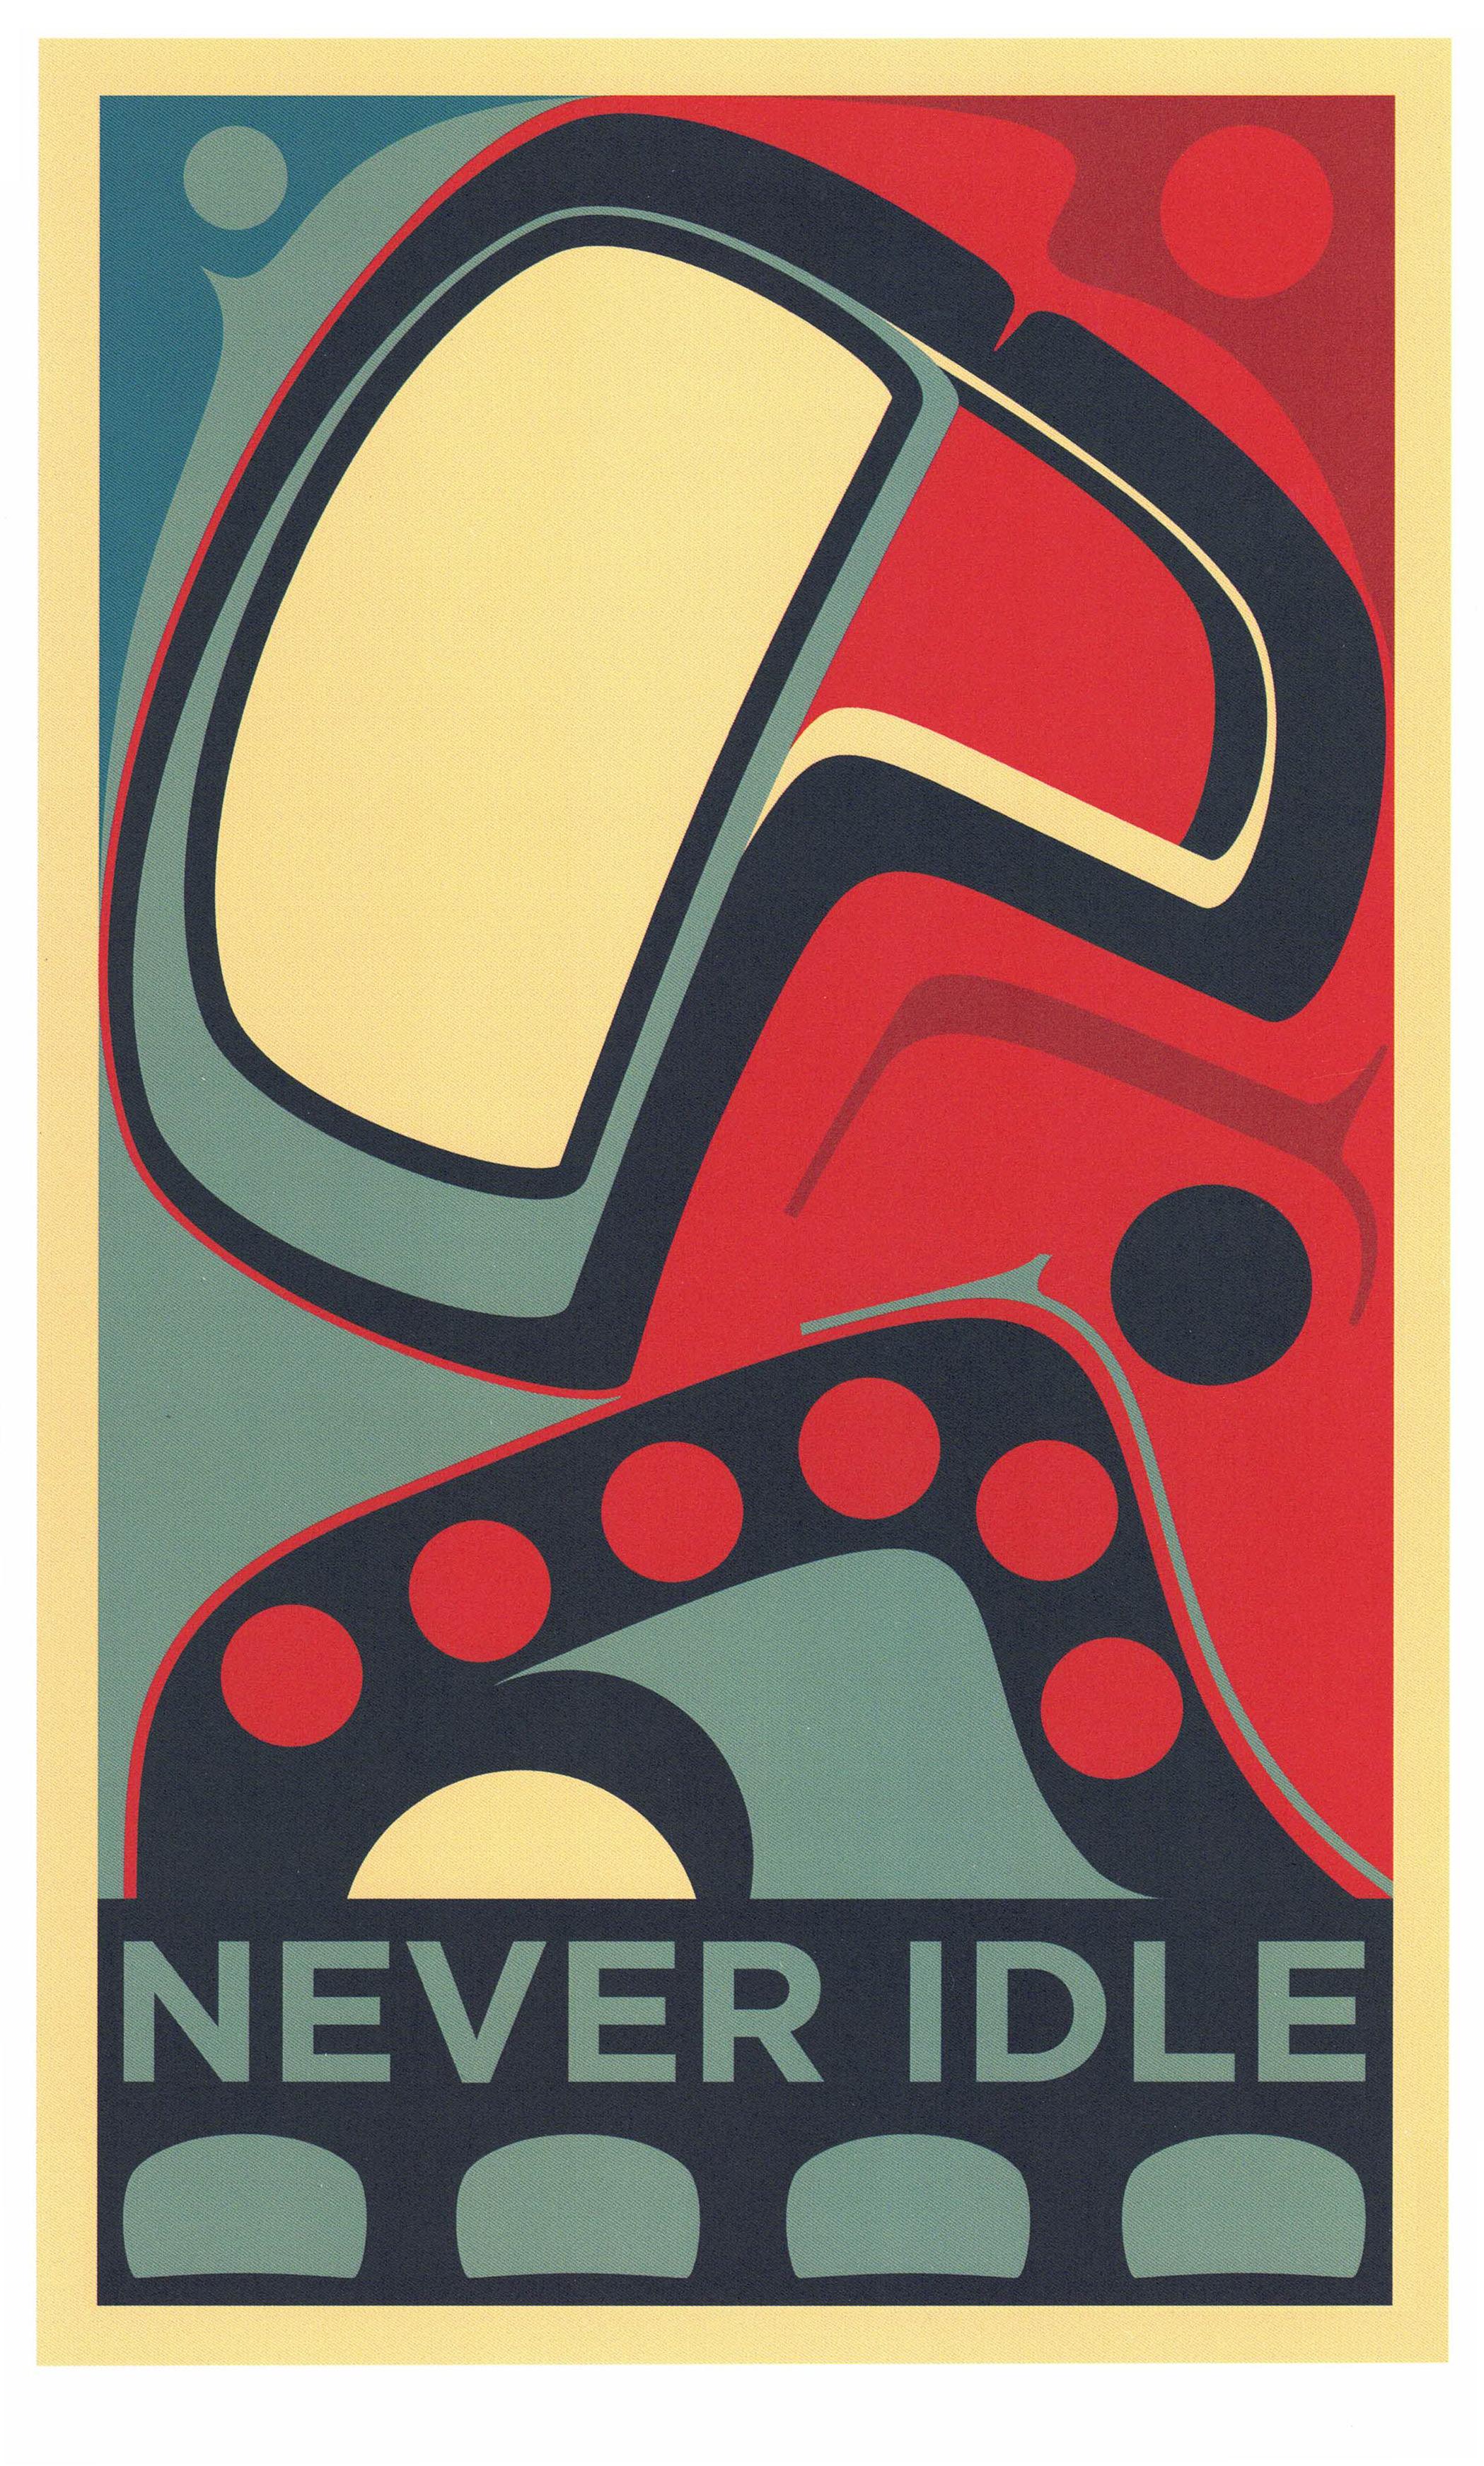 Sonny Assu Abstract Print - There is Hope, If We Rise (Never Idle)